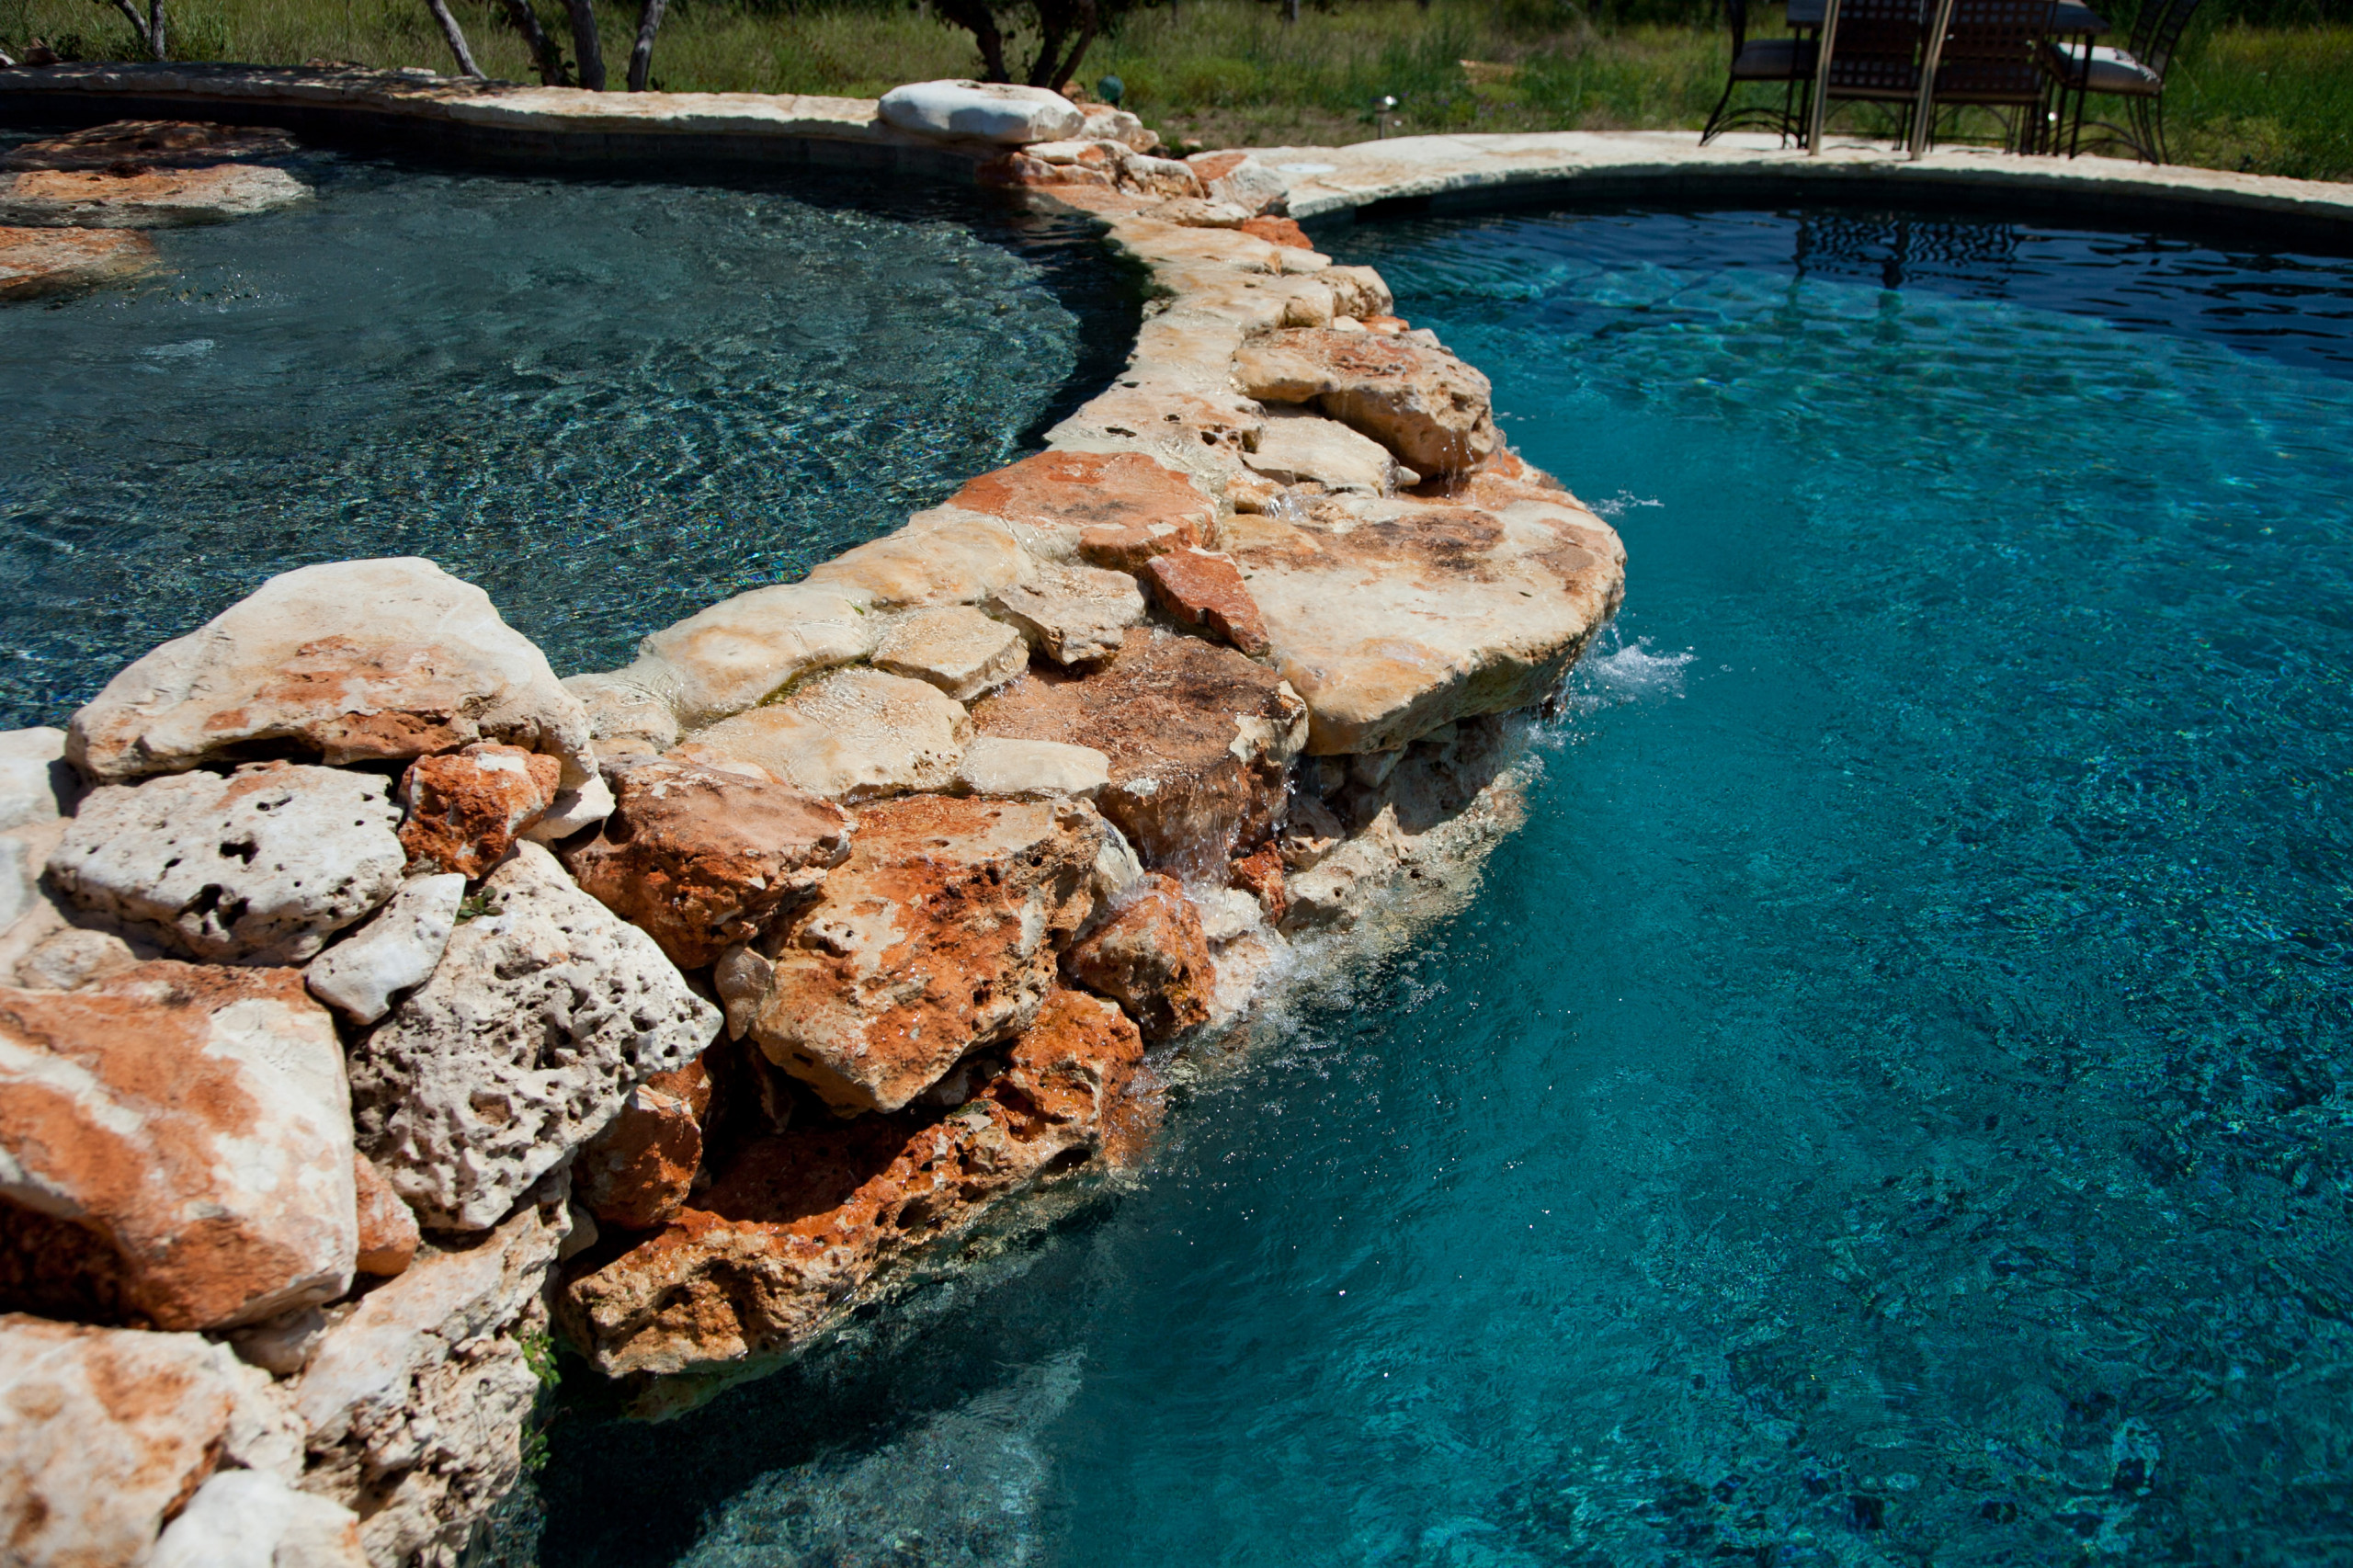 Boerne Natural Play Pool/Spa/Guesthouse/Outdoor Living